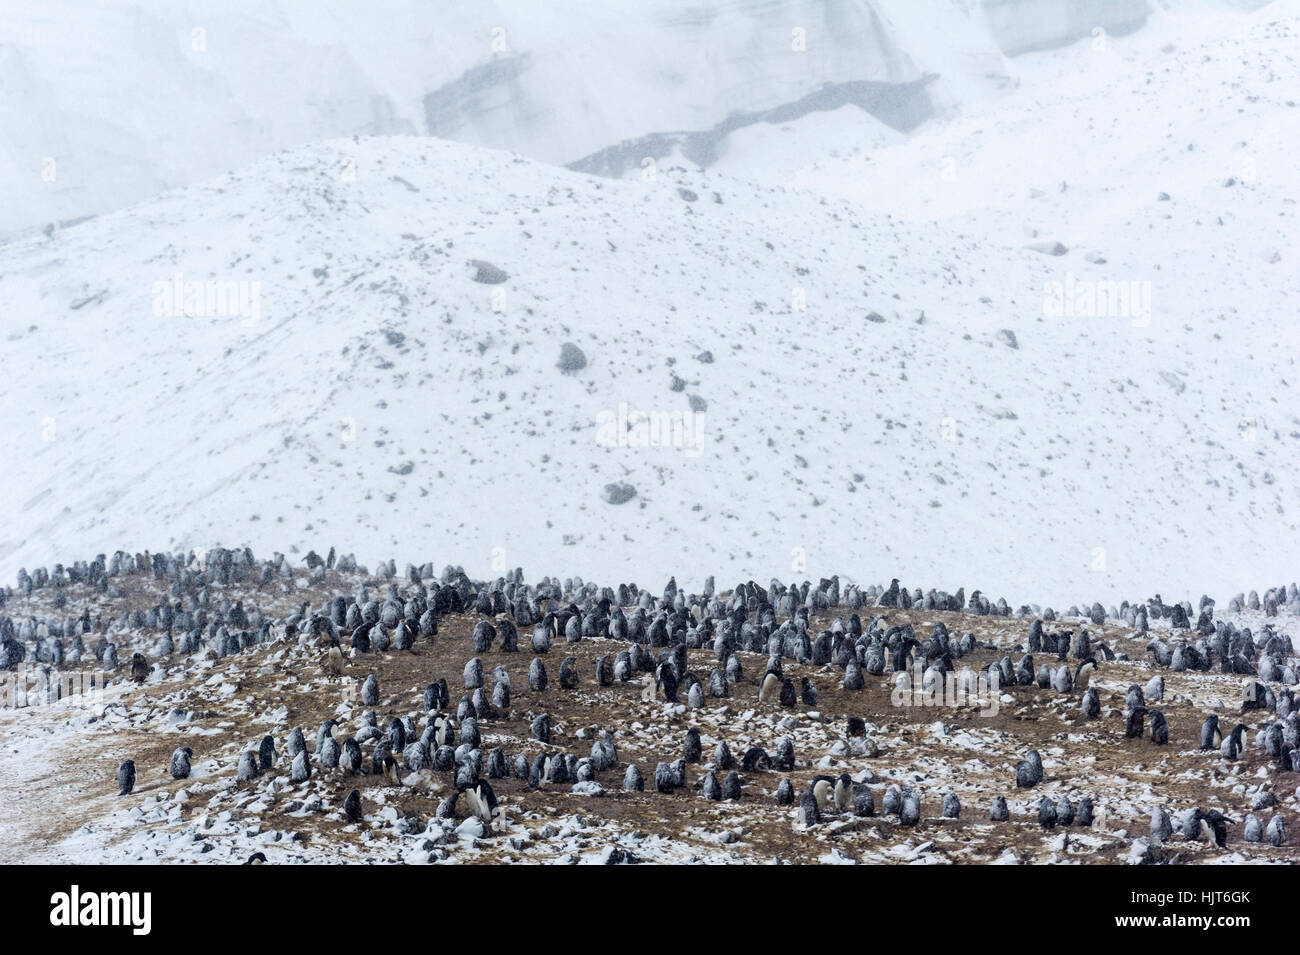 A breeding colony of Adelie Penguins during a snow storm on an island in Antarctica. Stock Photo